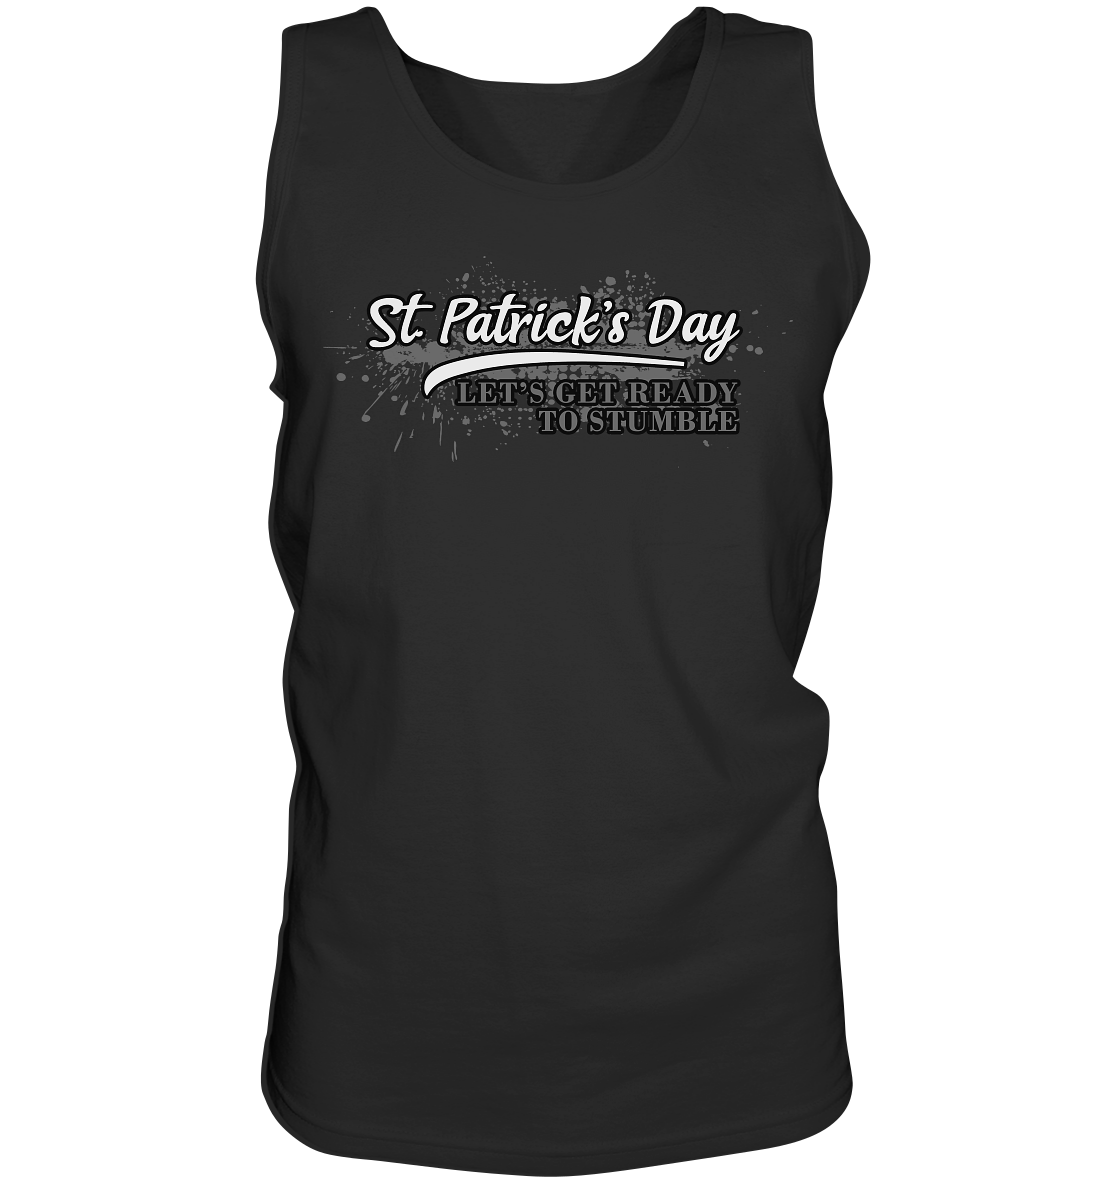 St. Patrick's Day "Let's Get Ready To Stumble" - Tank-Top